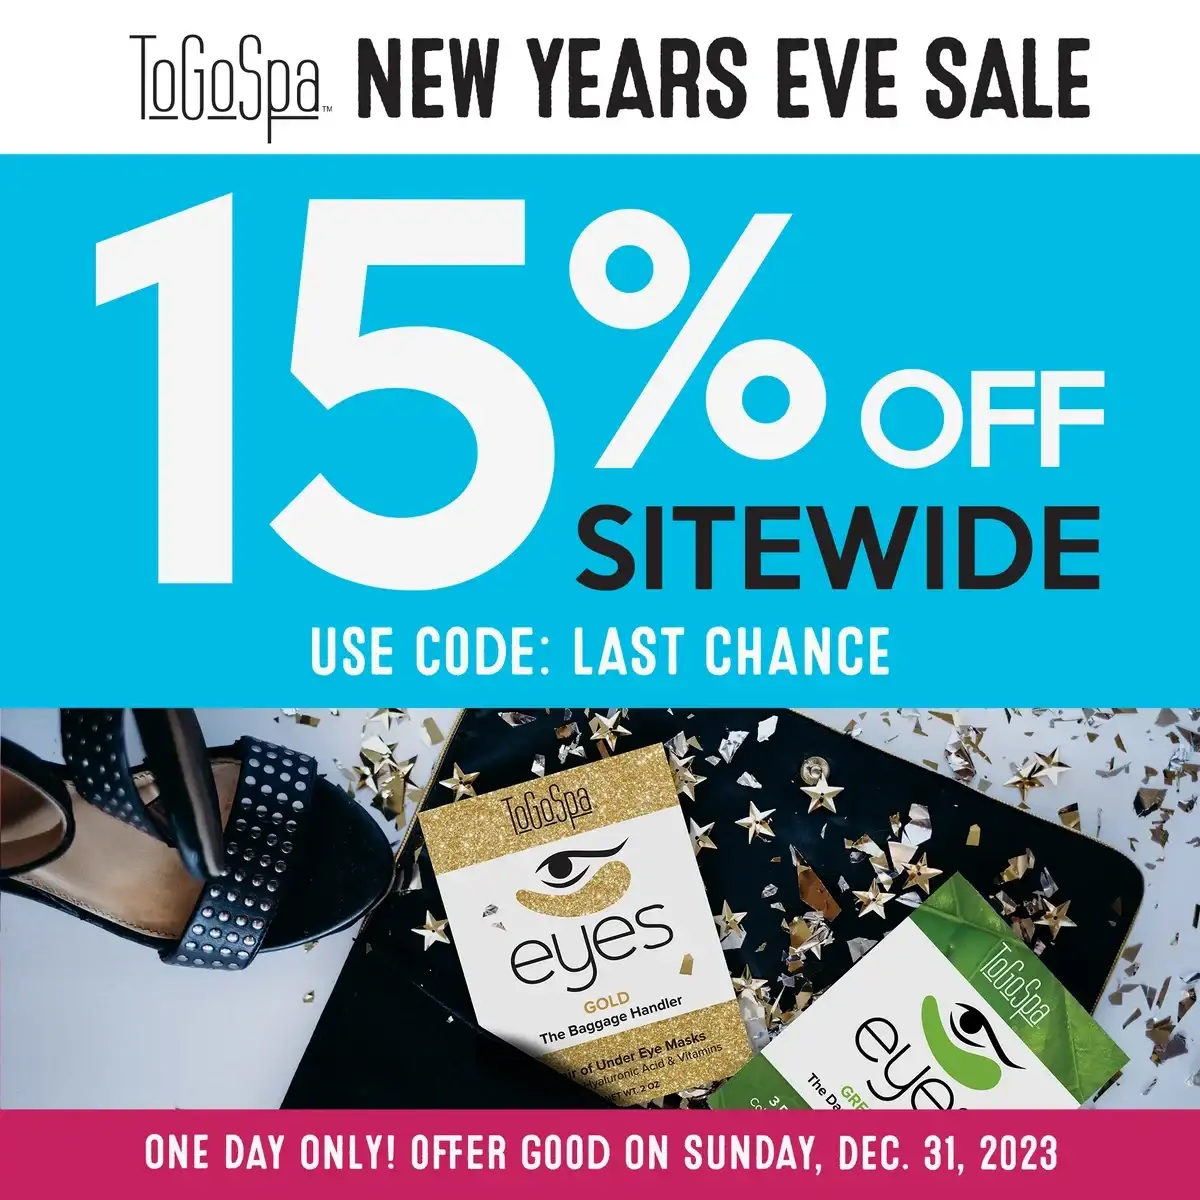 New Years Eve Sale